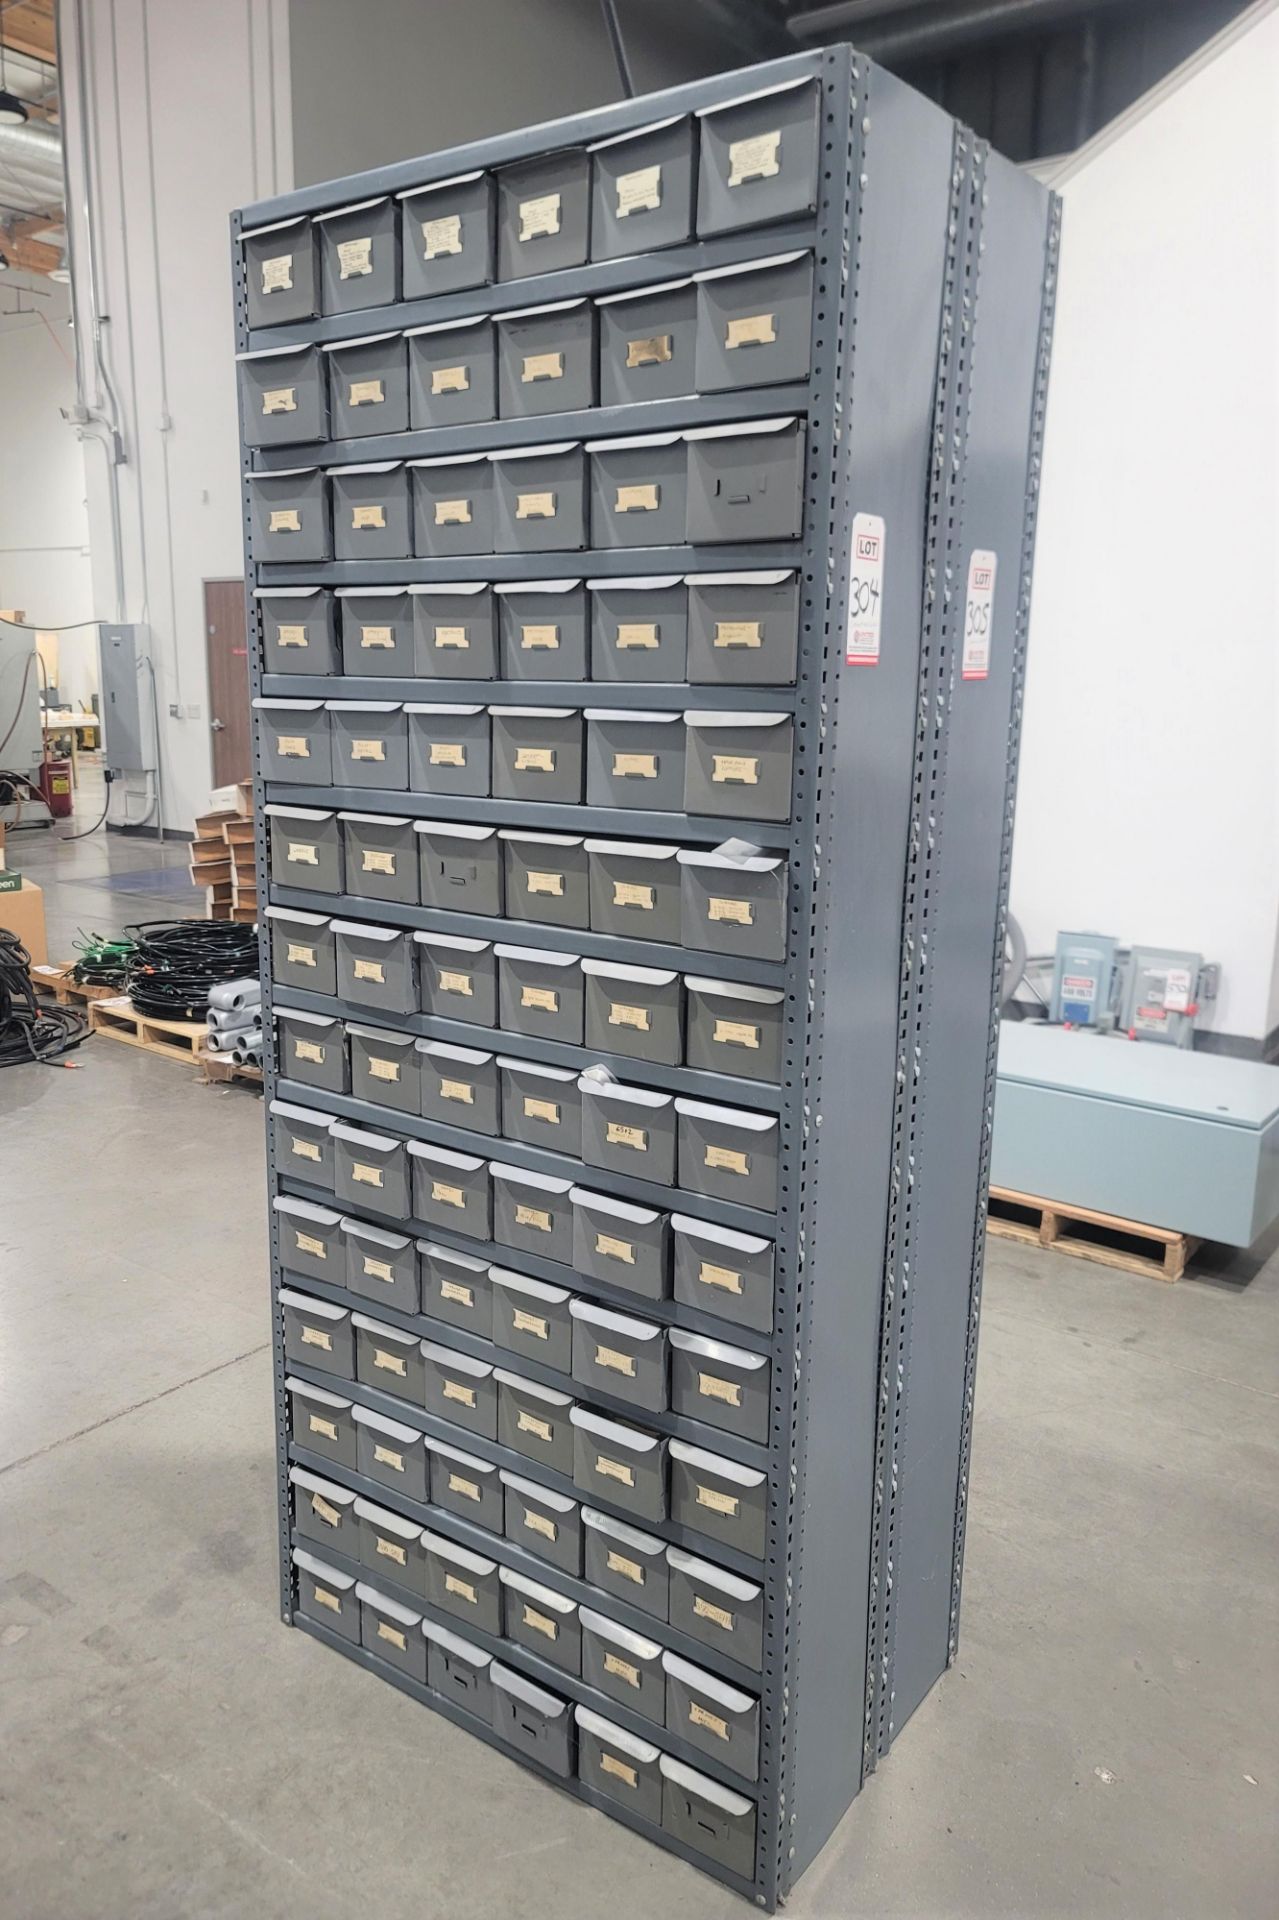 84-DRAWER PARTS CABINET, 3' X 12" X 85", W/ CONTENTS OF ASSORTED HARDWARE: O-RINGS, RUBBER MOTOR